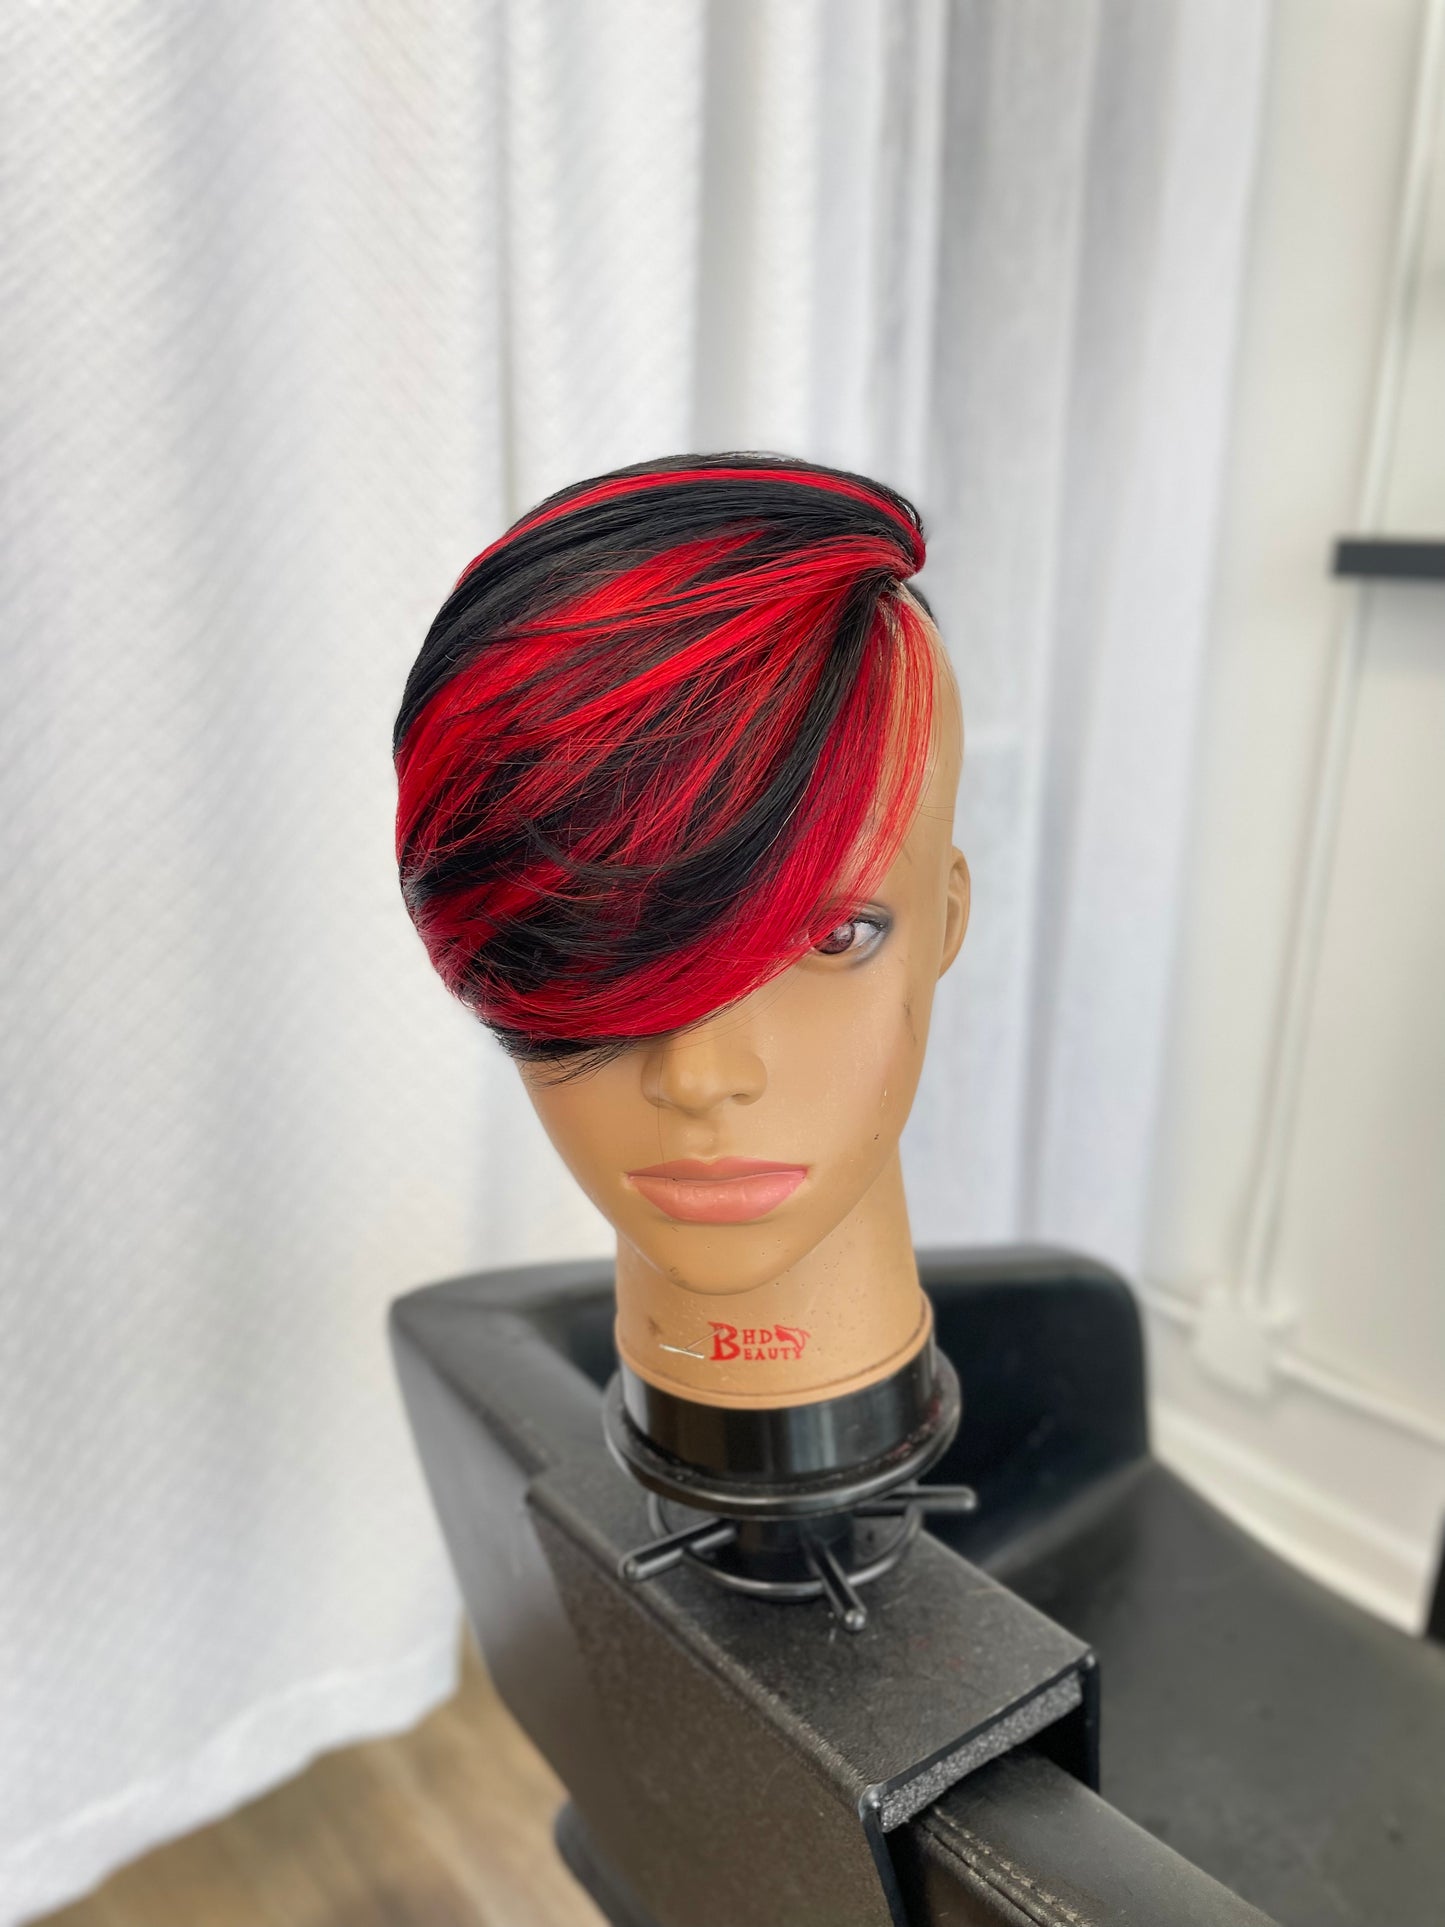 Classy Chick Unit  Manelifestudio Black with red  